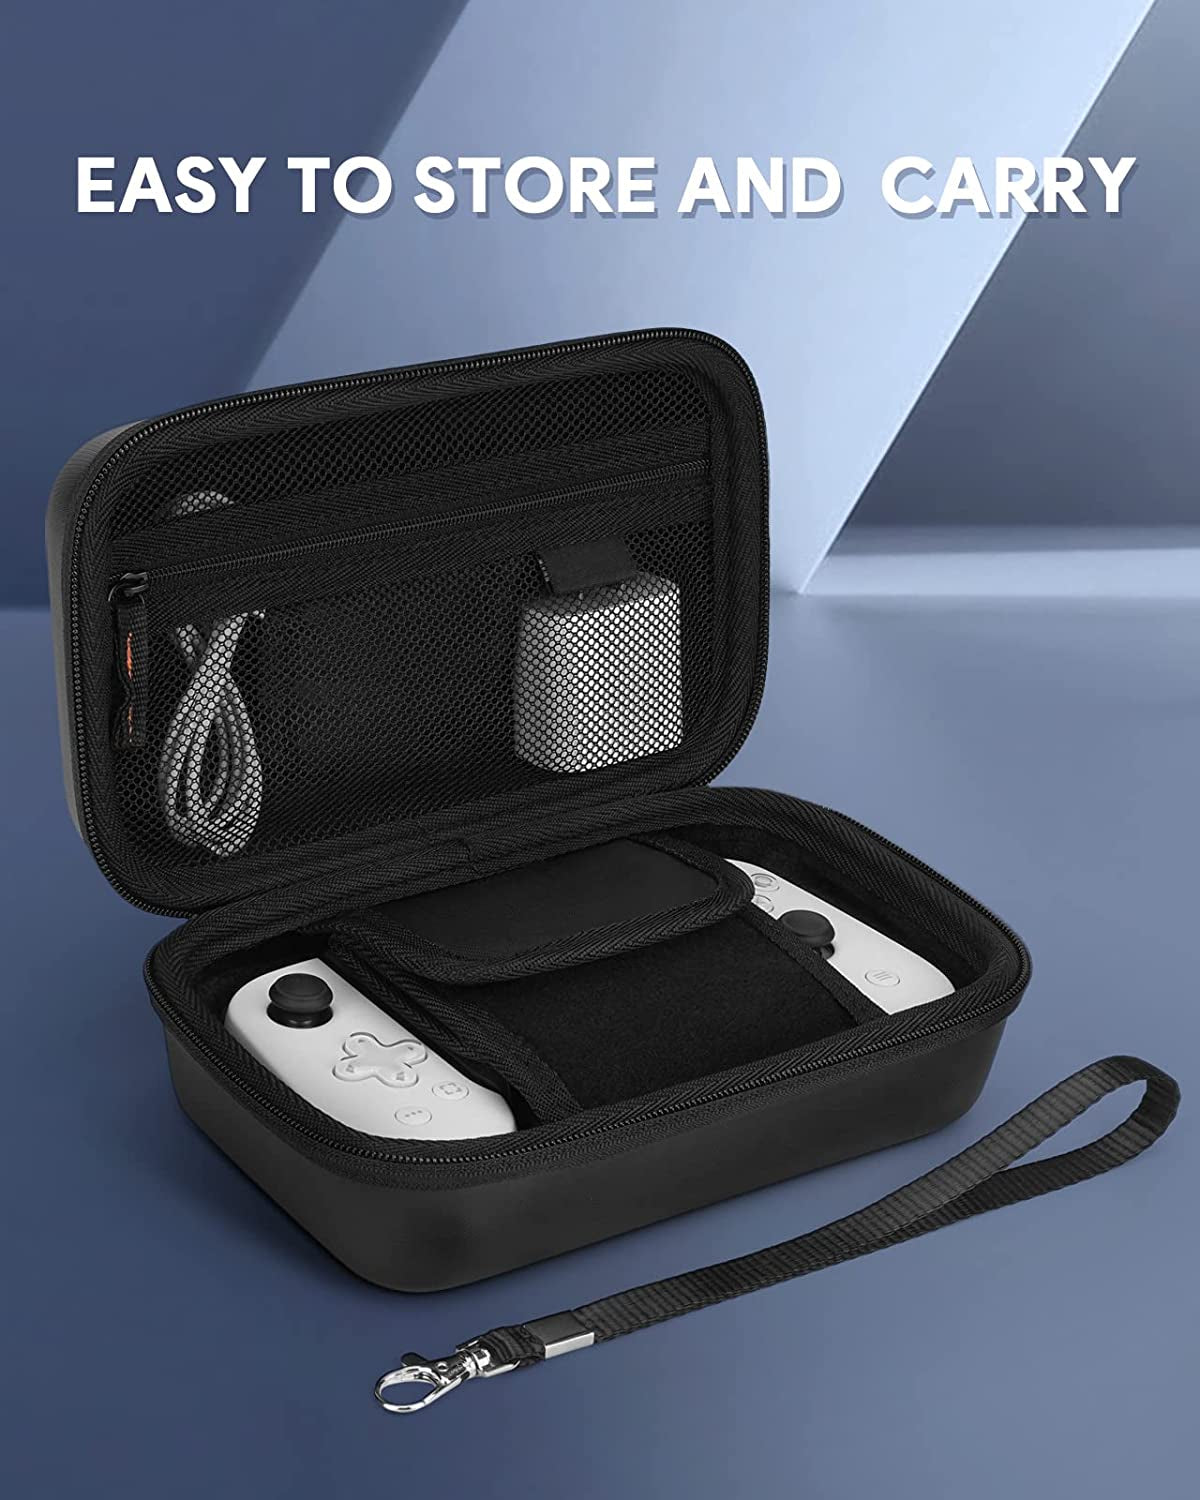 Carrying Case Compatible with Backbone Controller for Iphone/Android, Backbone One Playstation Gaming Controller Accessories, Protective/Hard/Waterproof/Portable/Storage Case (Only Case)